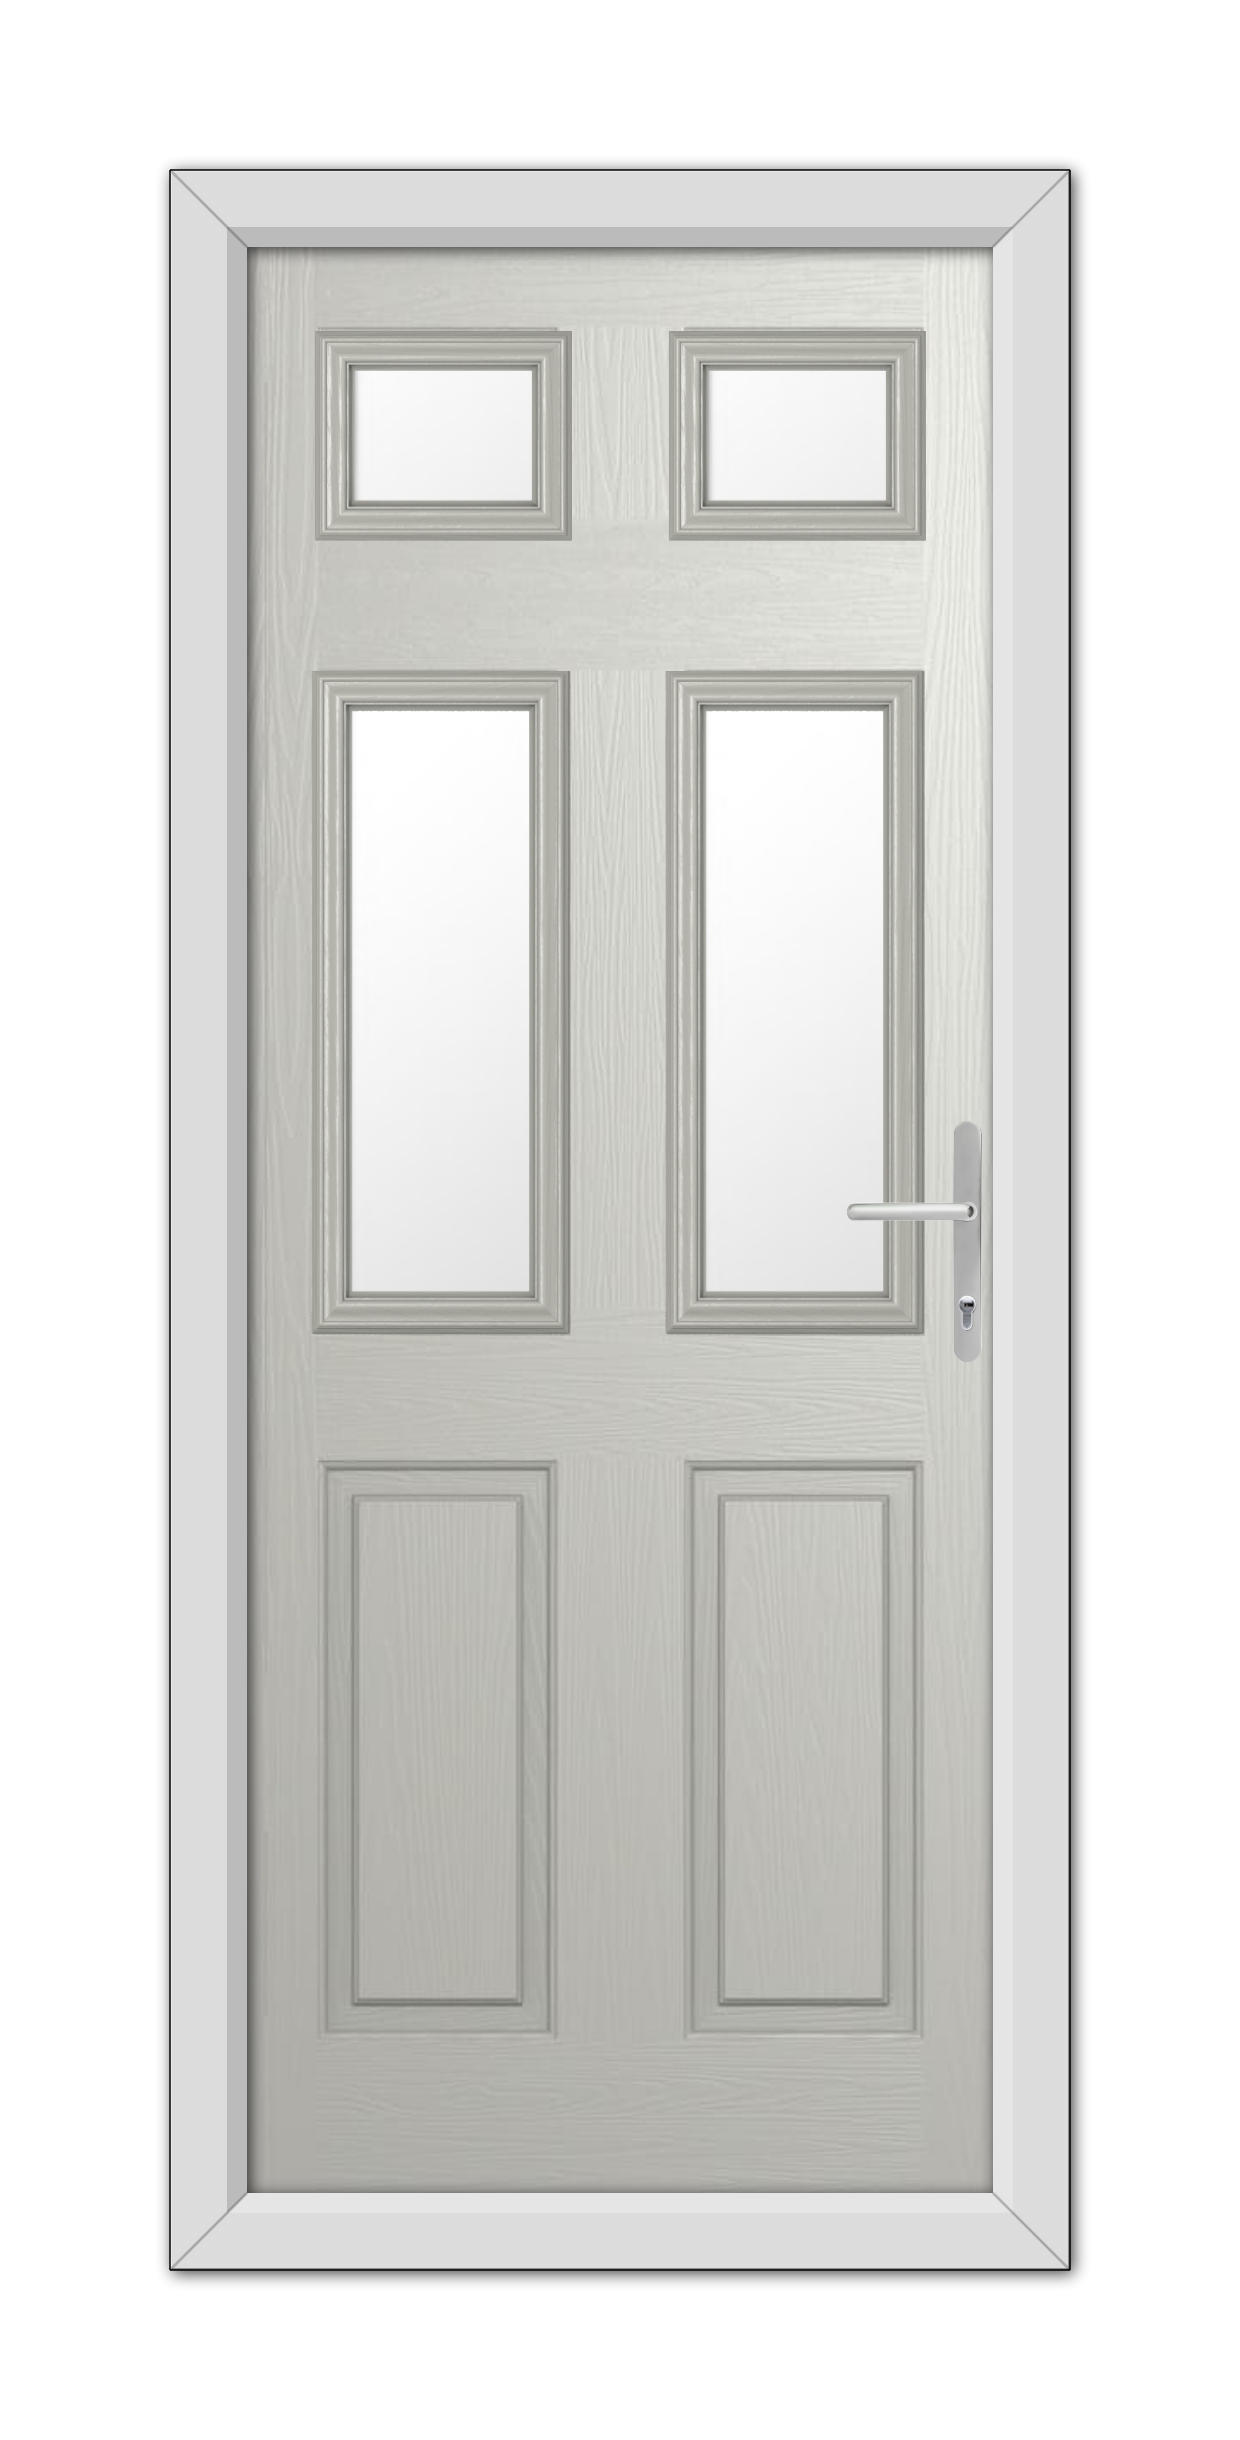 A modern Agate Grey Middleton Glazed 4 Composite Door 48mm Timber Core with six panels, three of which feature frosted glass, and a metallic handle on the right side.